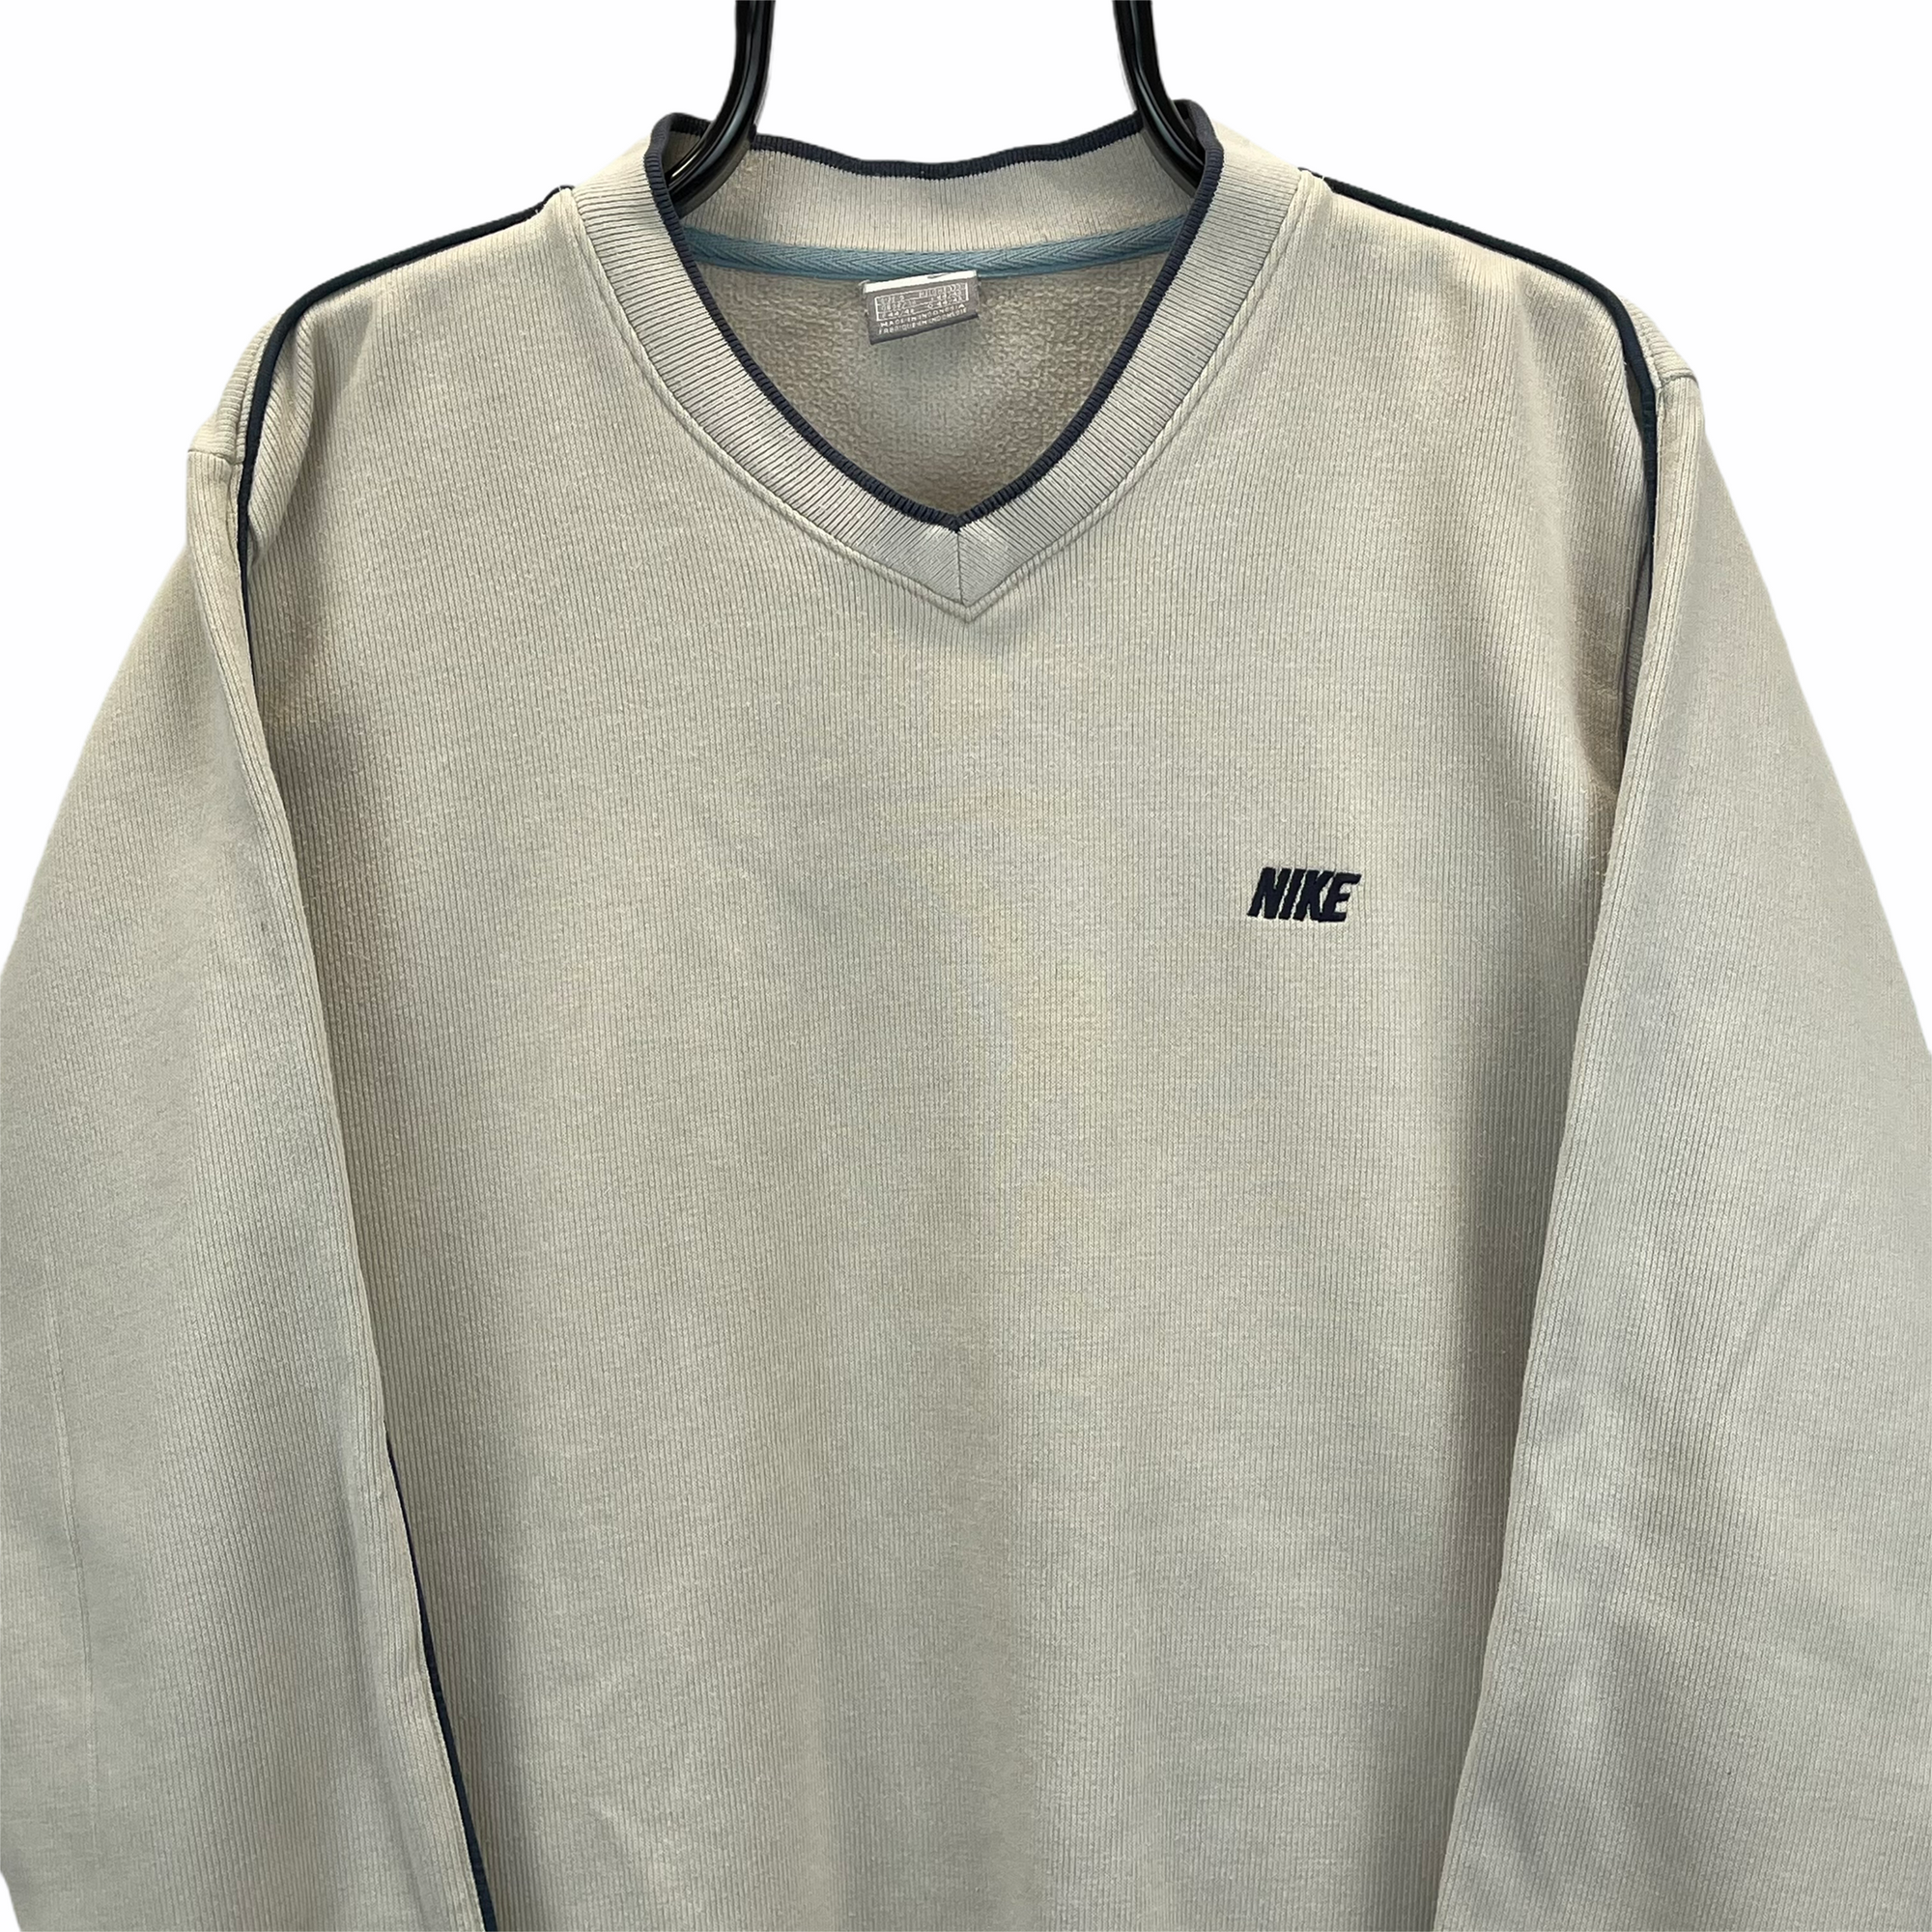 VINTAGE NIKE EMBROIDERED SMALL SPELLOUT SWEATSHIRT IN BEIGE - MEN'S SMALL/WOMEN'S MEDIUM